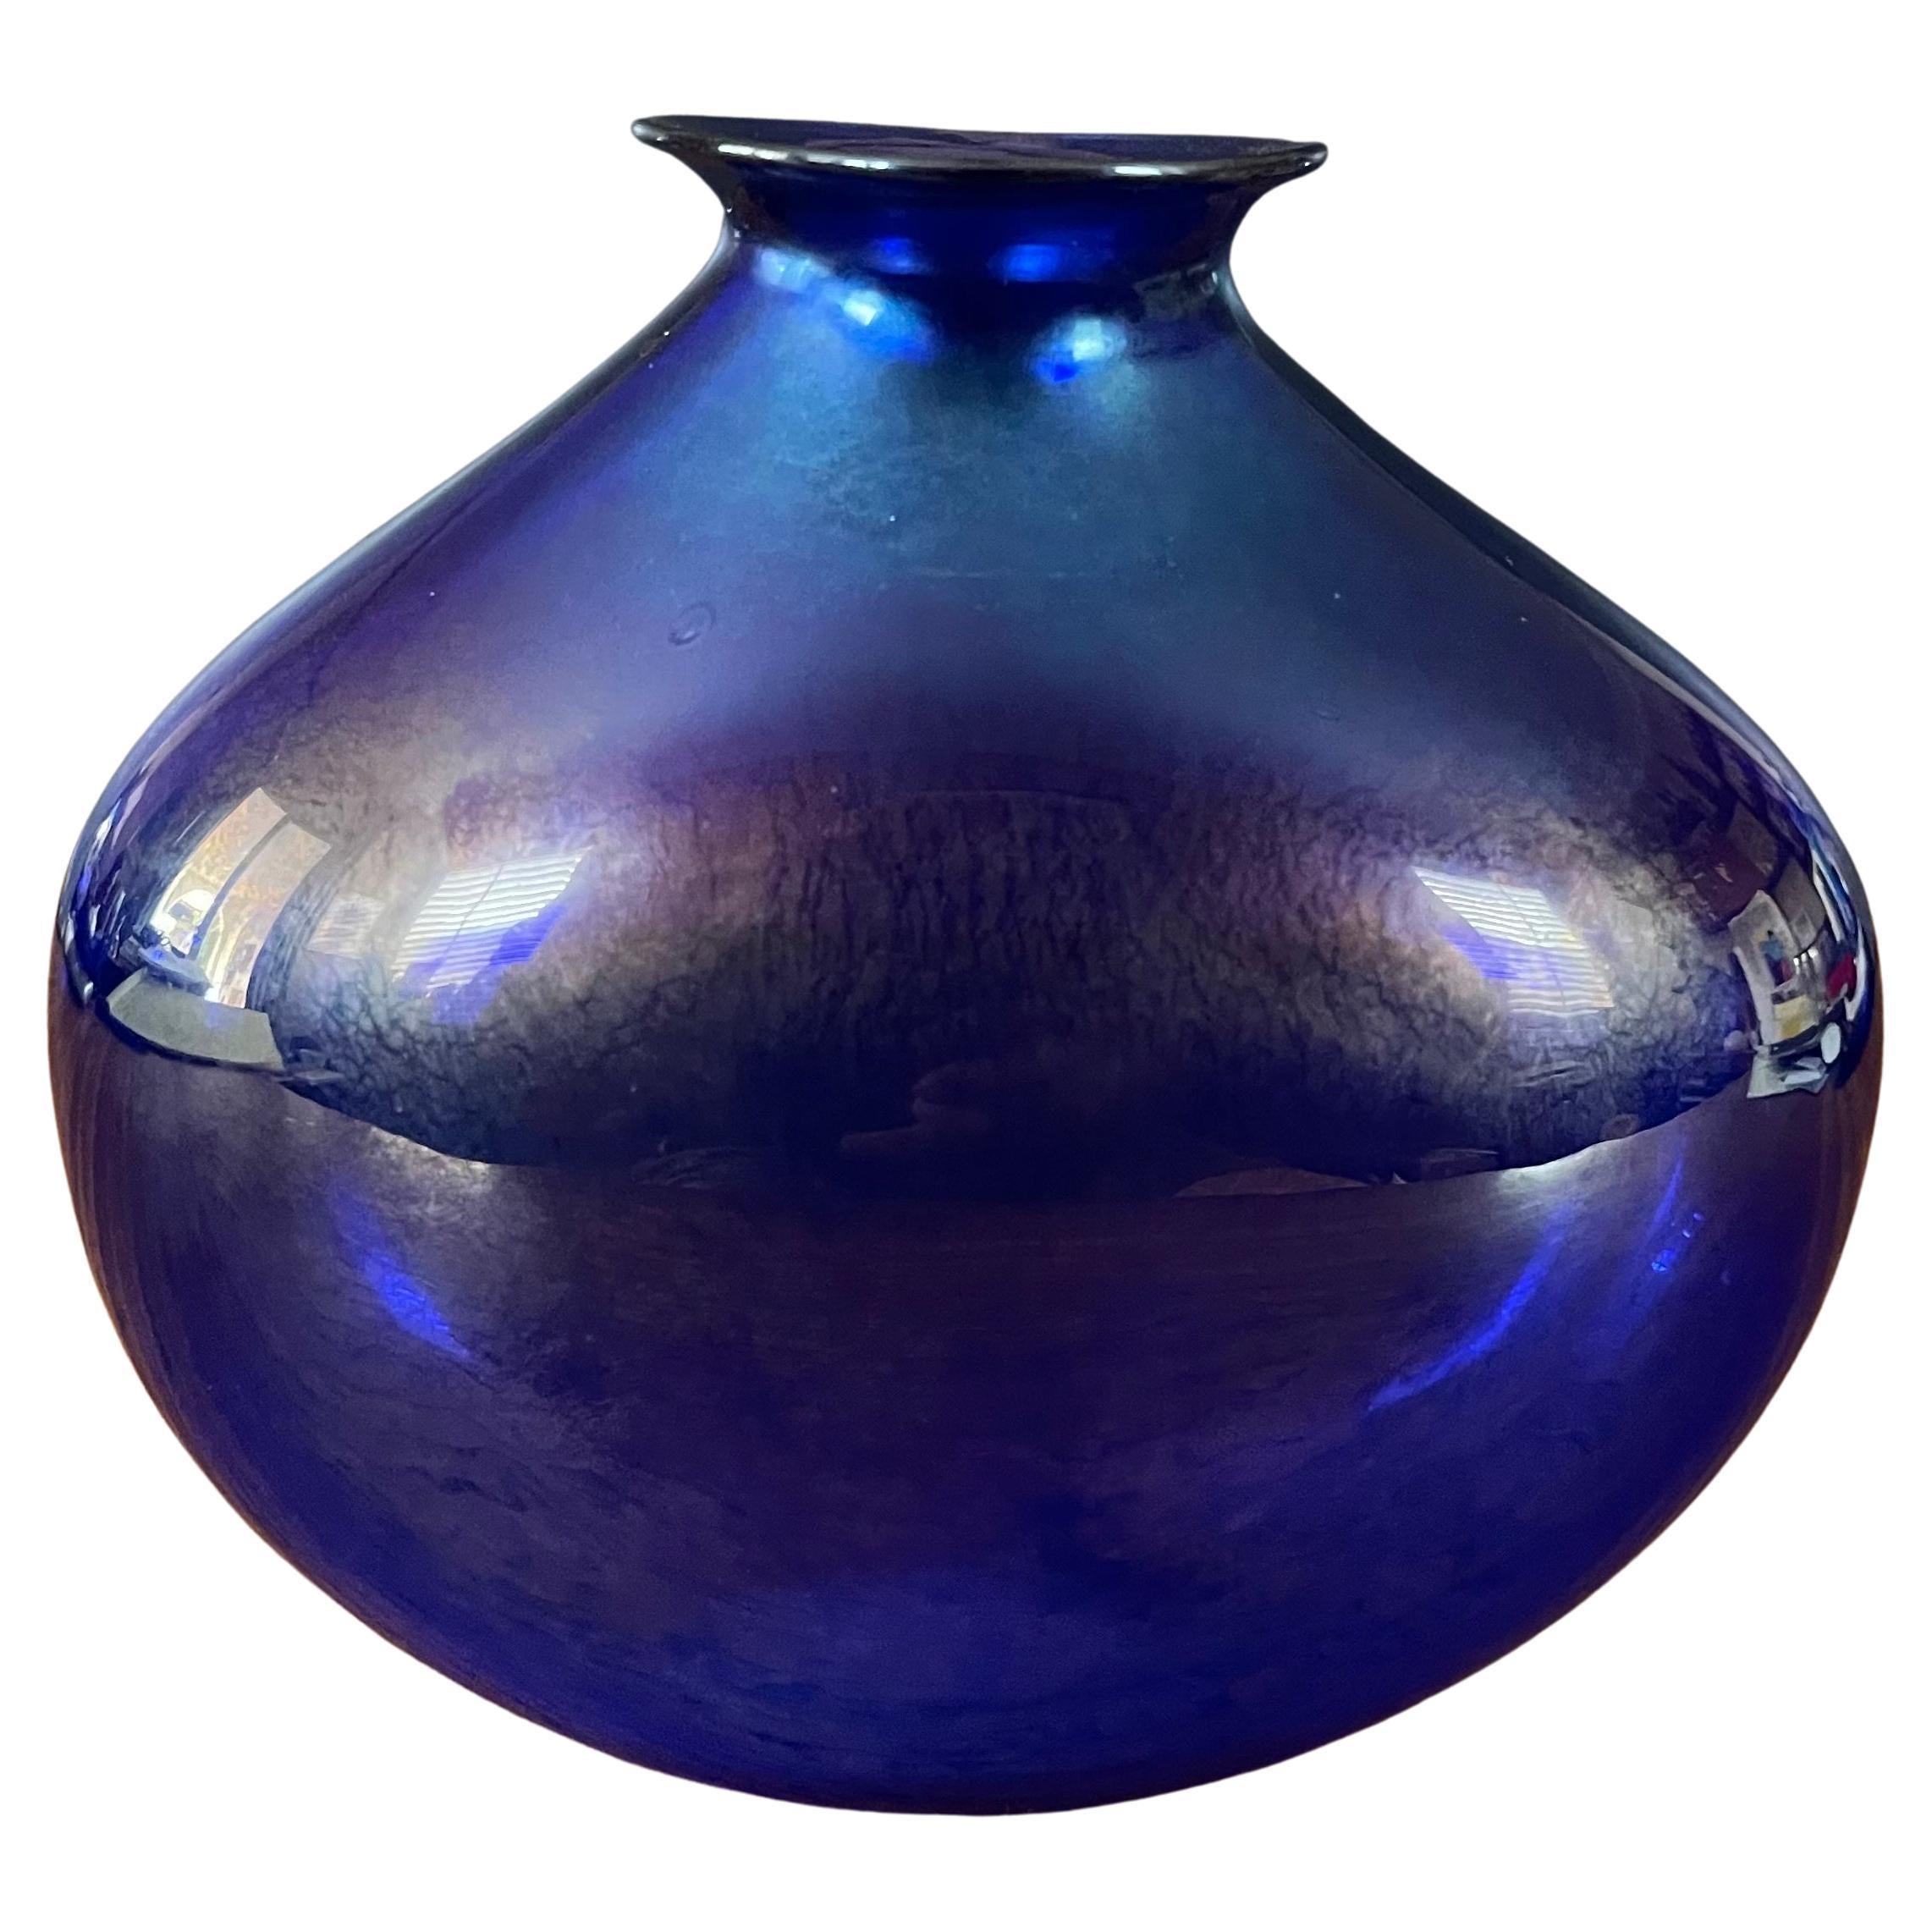 Stunning iridescent blue Aurene art glass vase by Claude Duperron, circa 1988. This vase is in very good vintage condition with no chips or cracks and measures 7